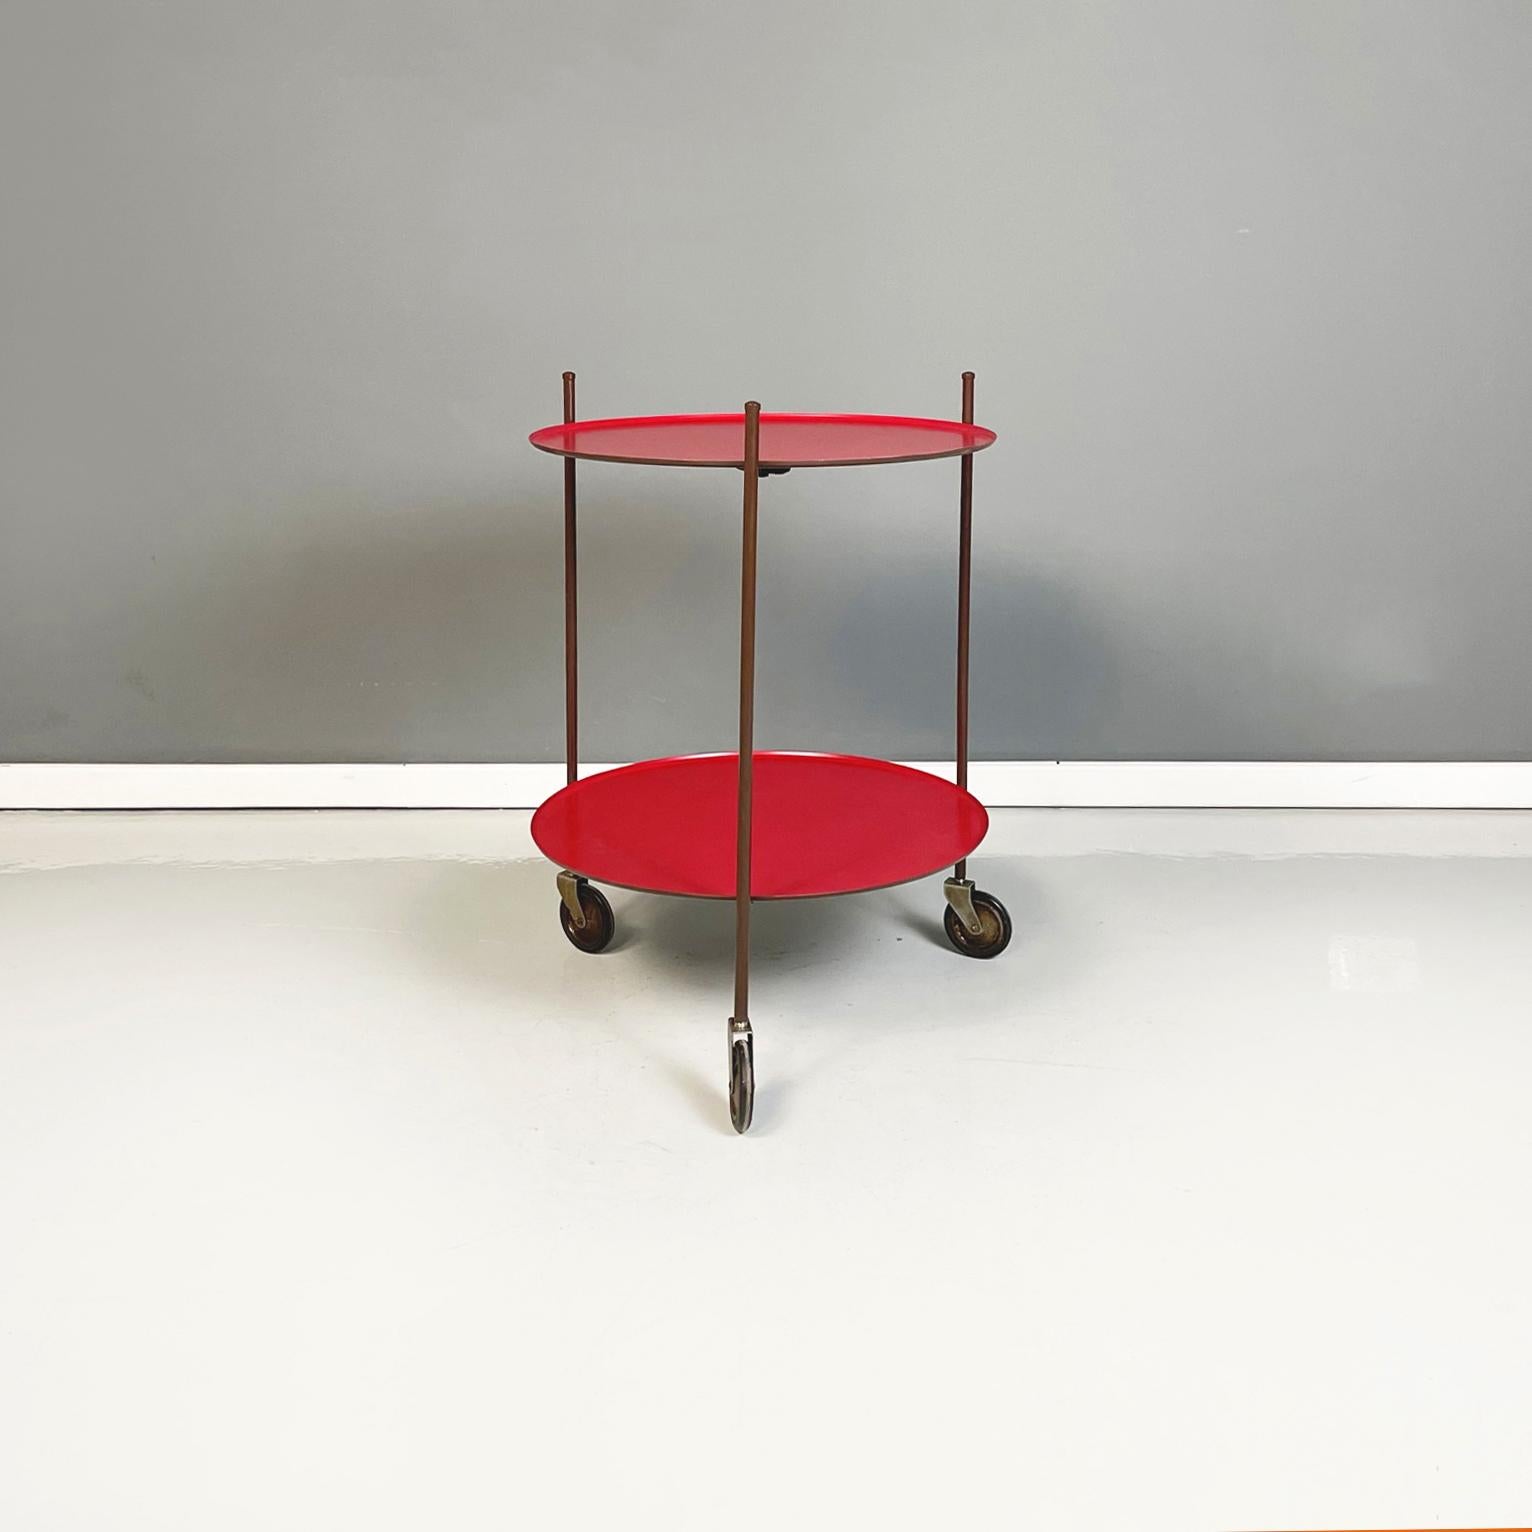 Italian modern Red and brown round cart with tubular metal, 1970s
Fantastic cart with two round shelves in red painted metal. The structure is made up of 3 rods in brown painted tubular metal. Metal wheels at the base. The two shelves are removable